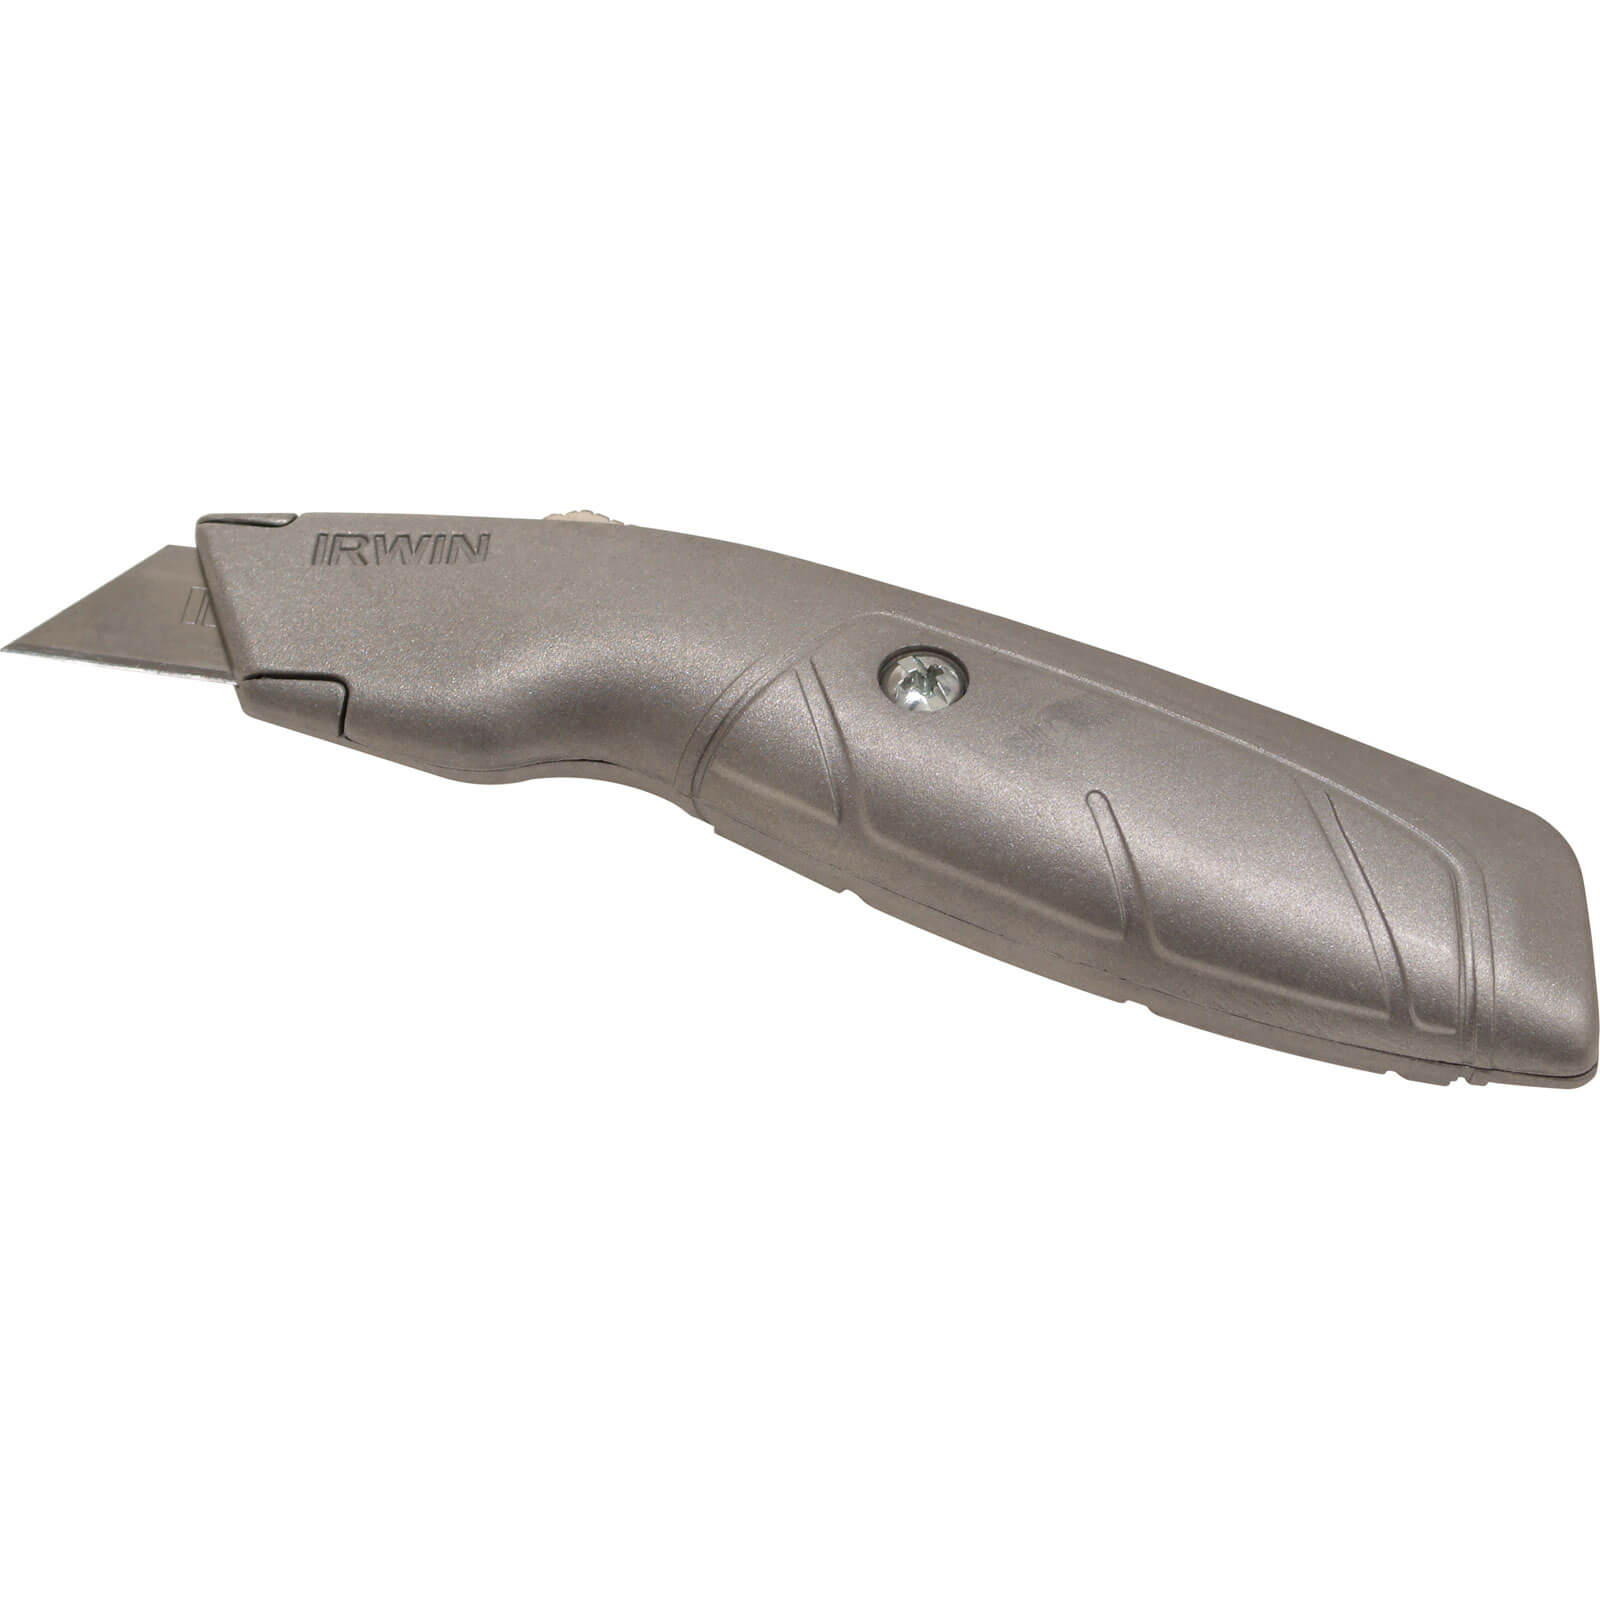 Irwin Pro Entry Retractable Blade Knife